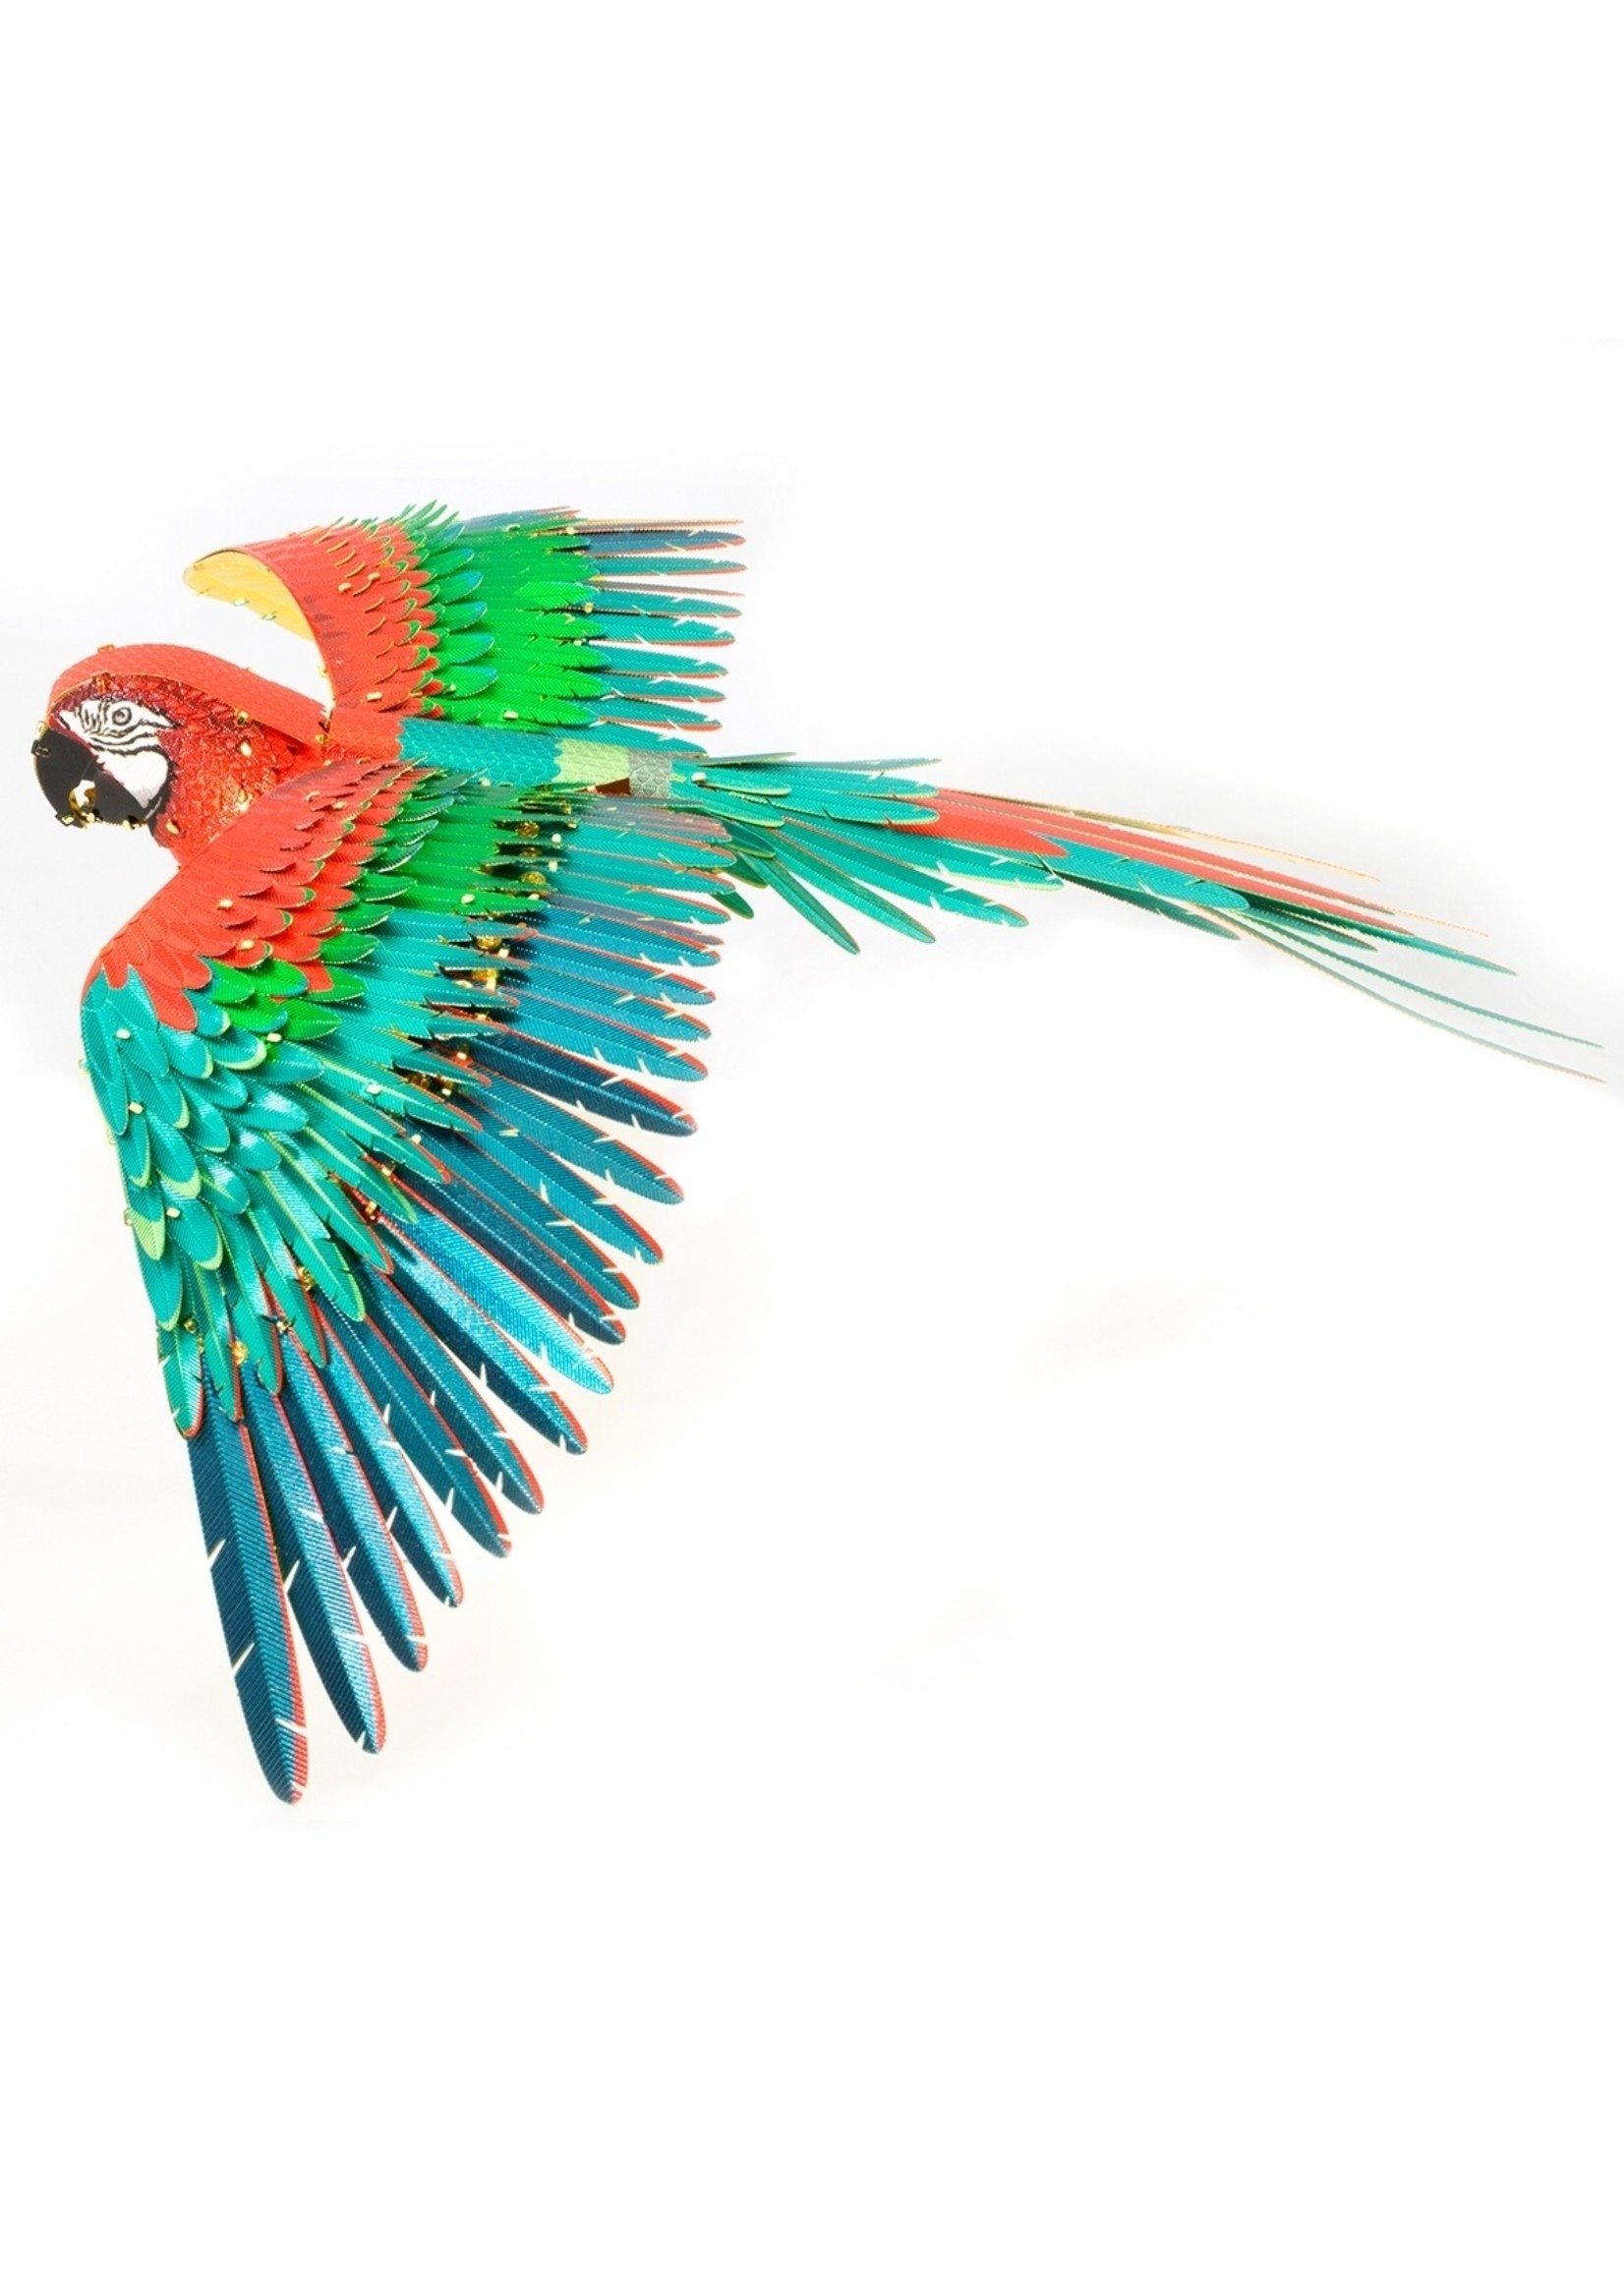 Fascinations Metal Earth - Parrot Jubilee Macaw ICX